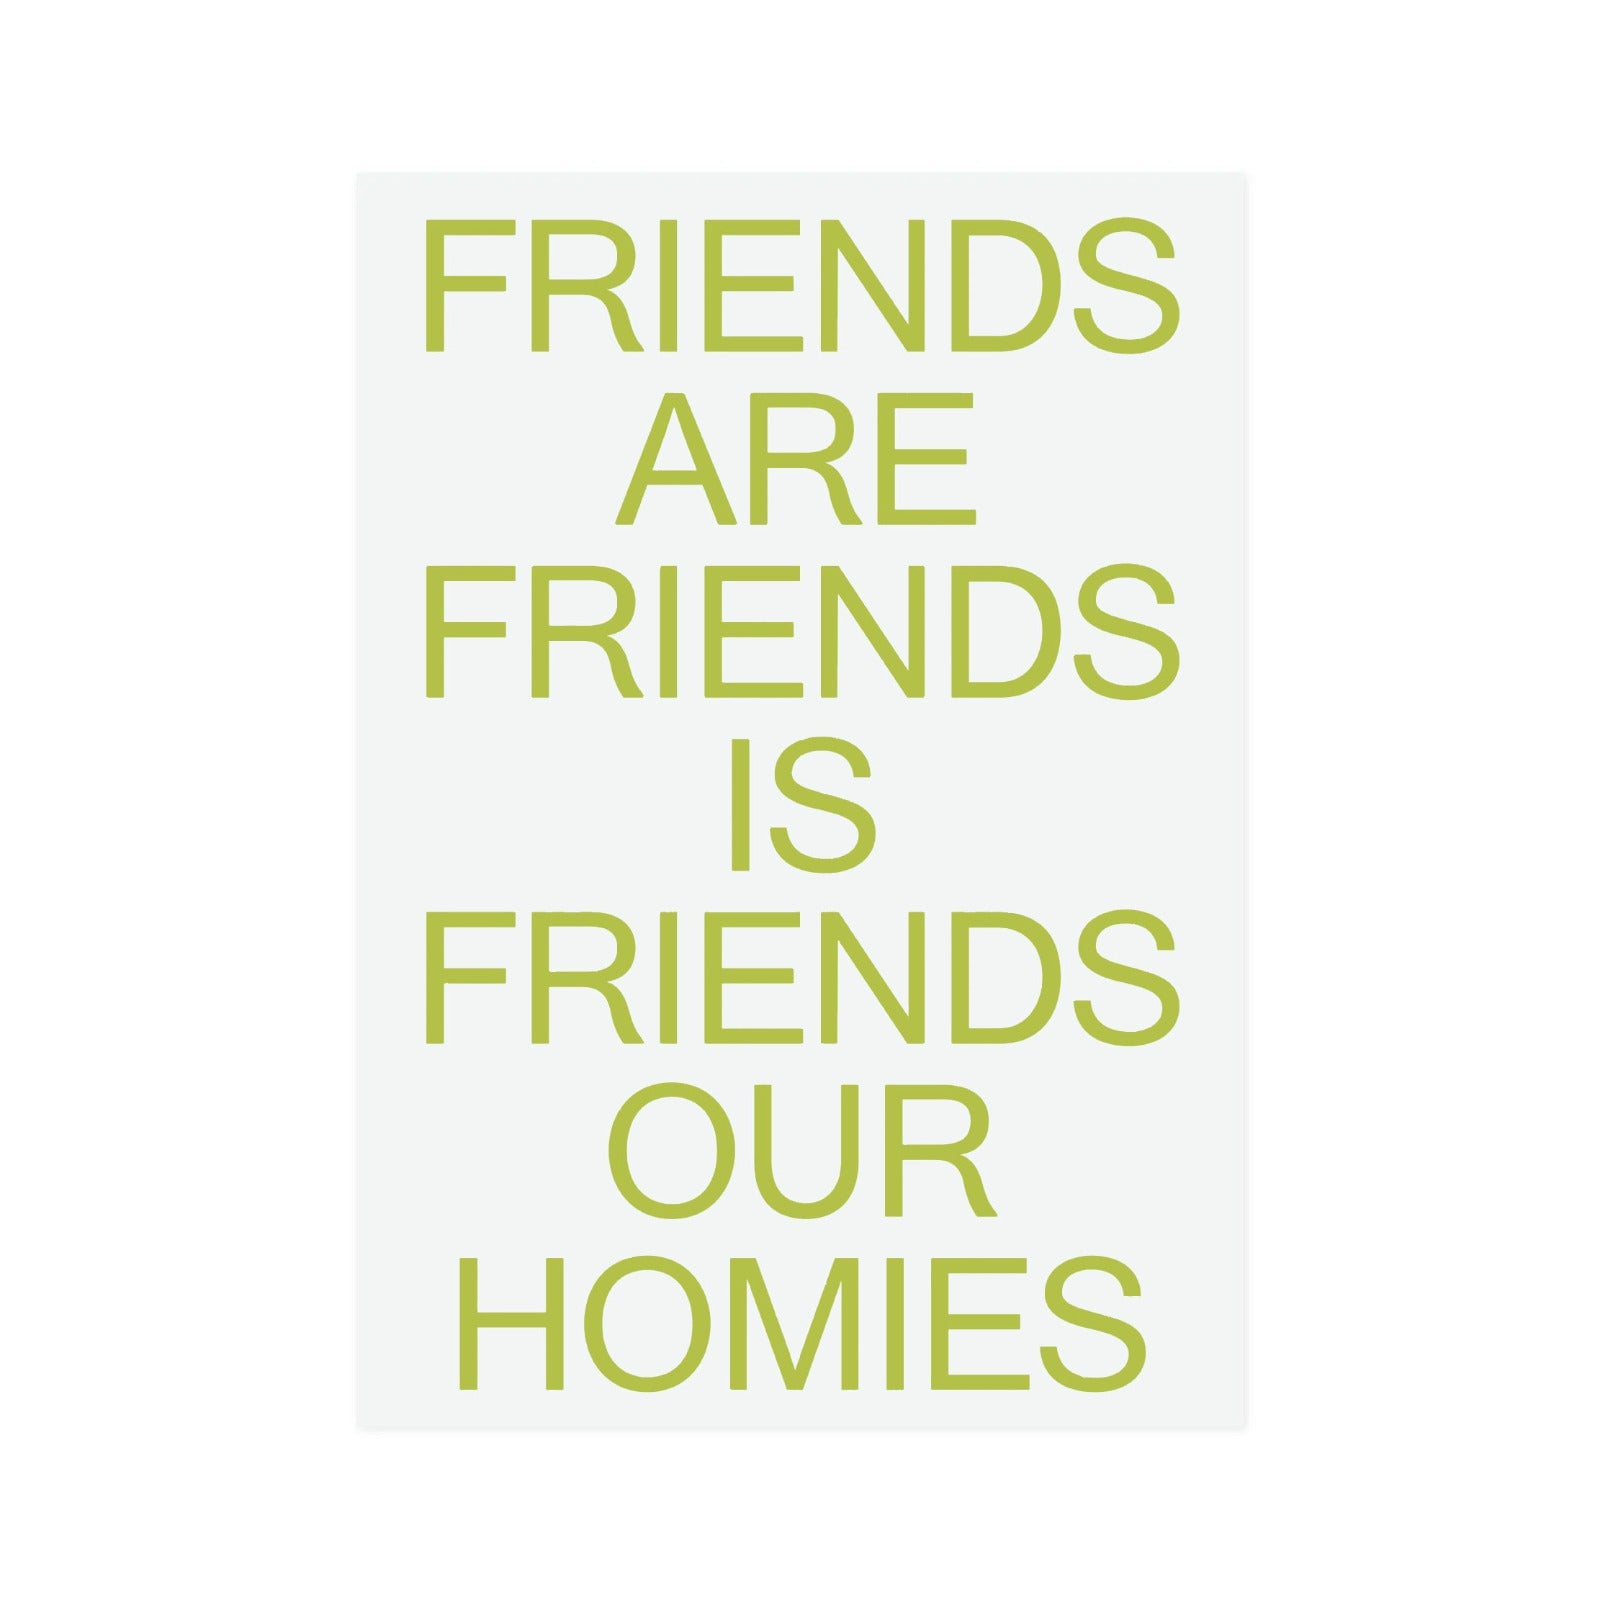 Catalogue Library - Catalogue Design - Friends Our Family A2  Print - Snot Green